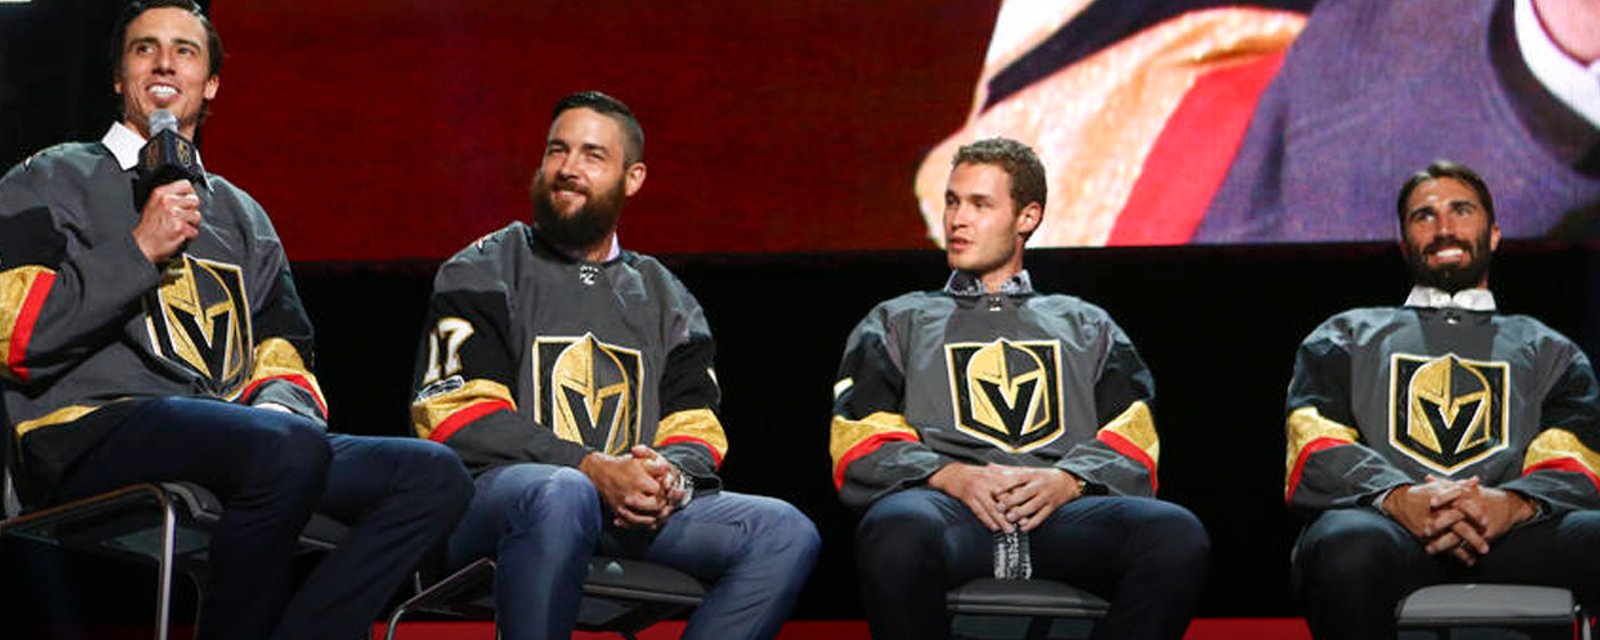 Breaking: Vegas places big name on waivers!